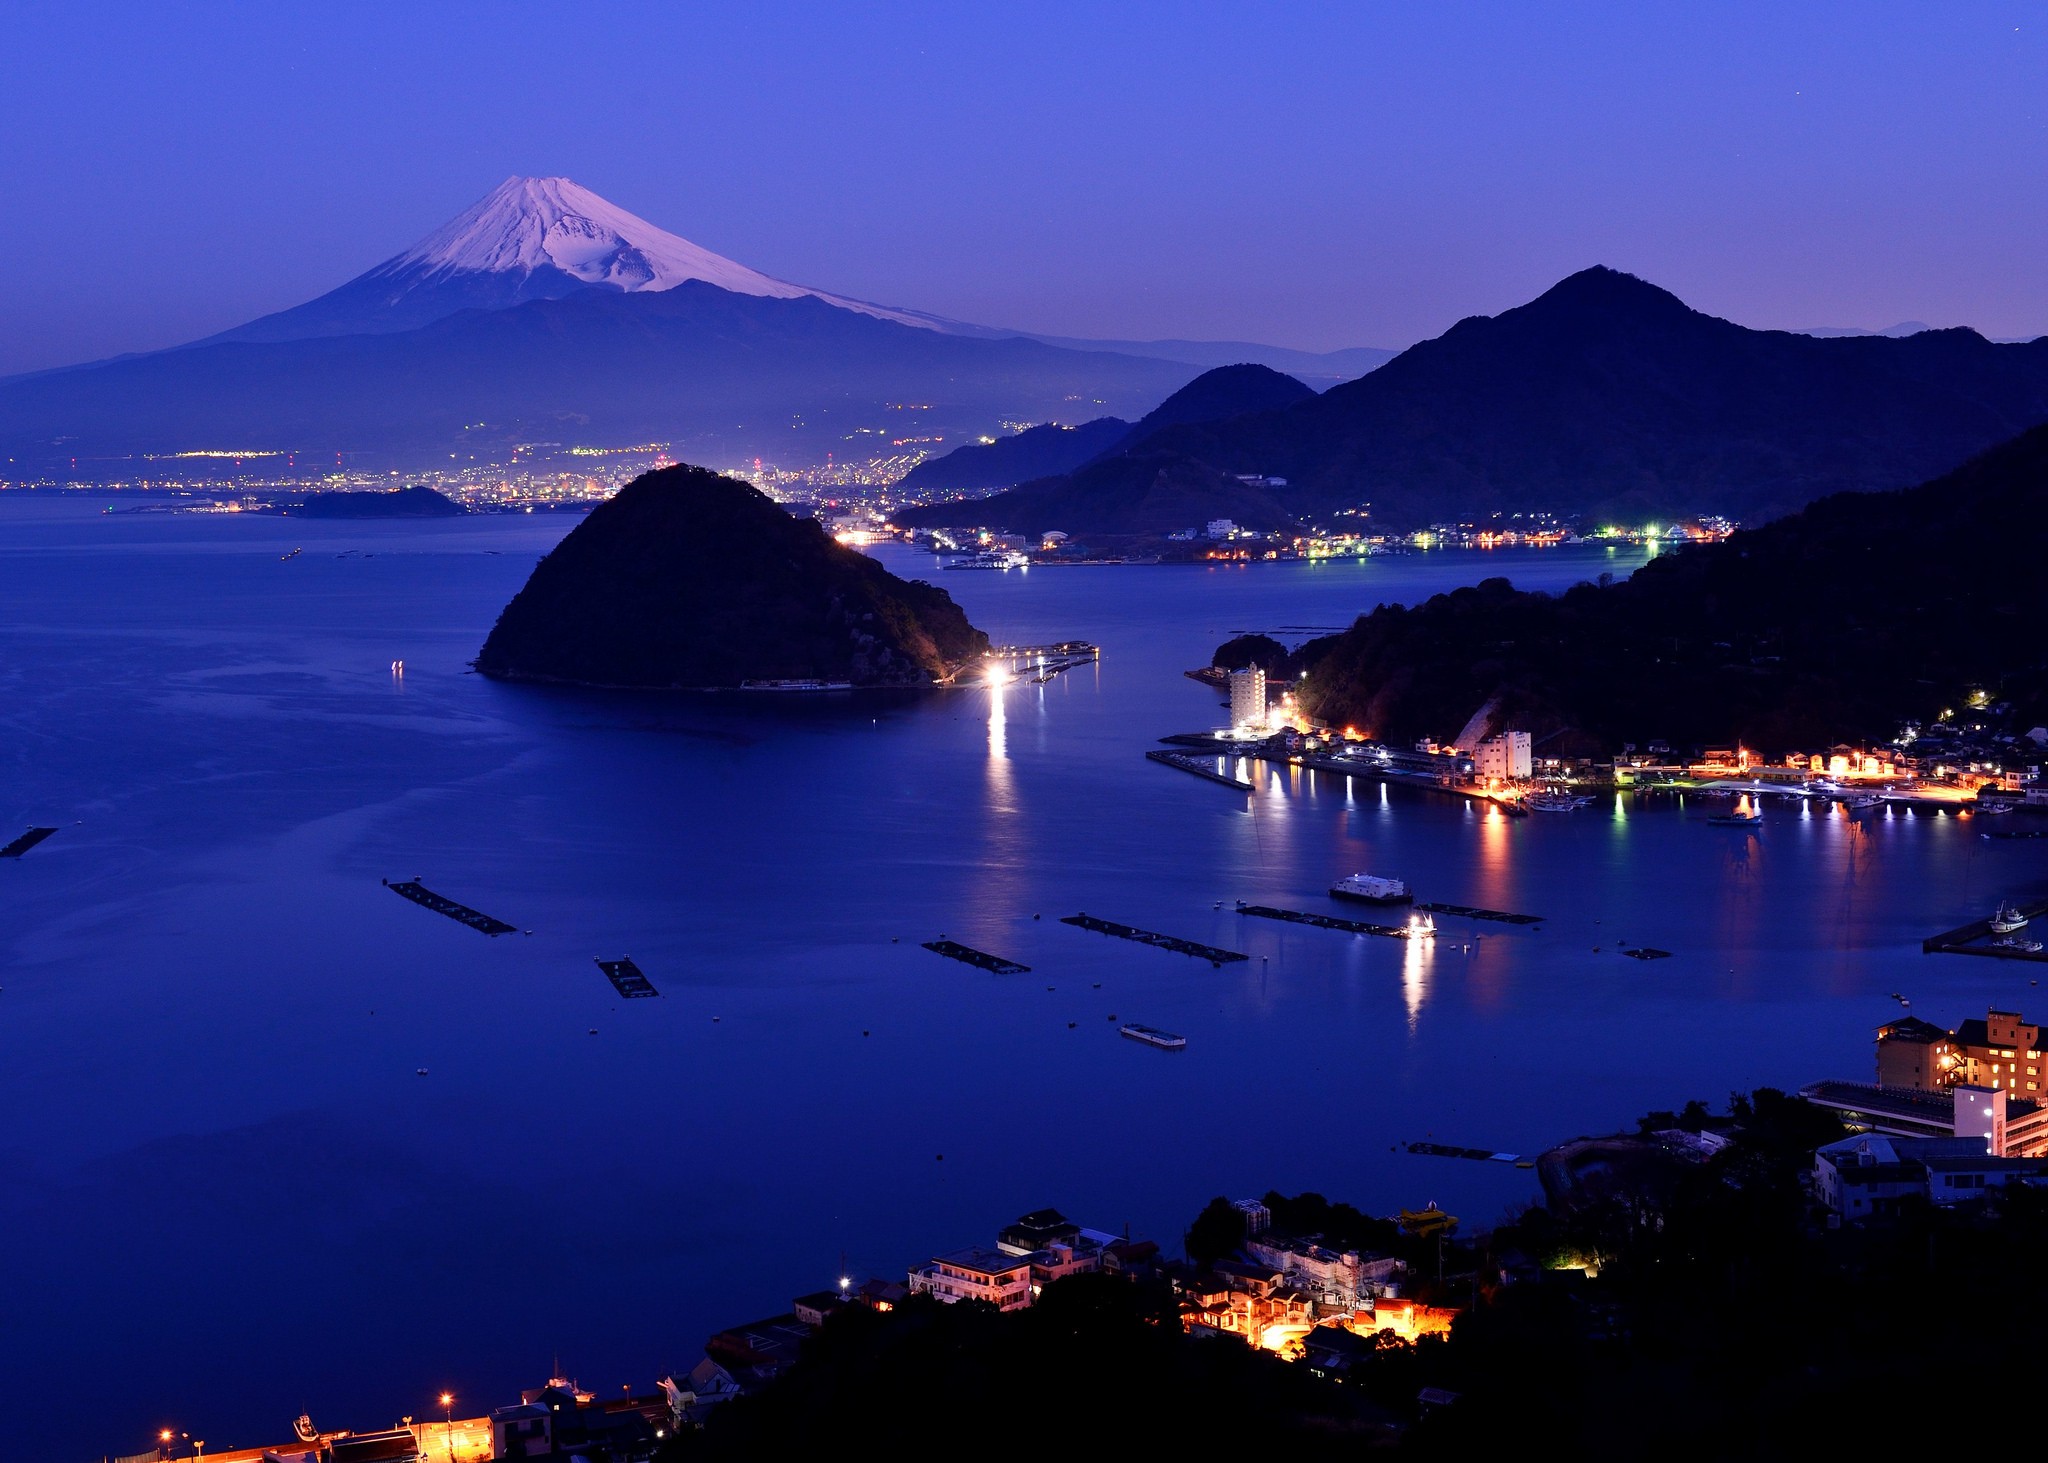 General 2048x1463 cityscape building landscape Japan Mount Fuji mountains snow island water sea bay evening lights ship boat dock hills reflection Asia volcano city lights